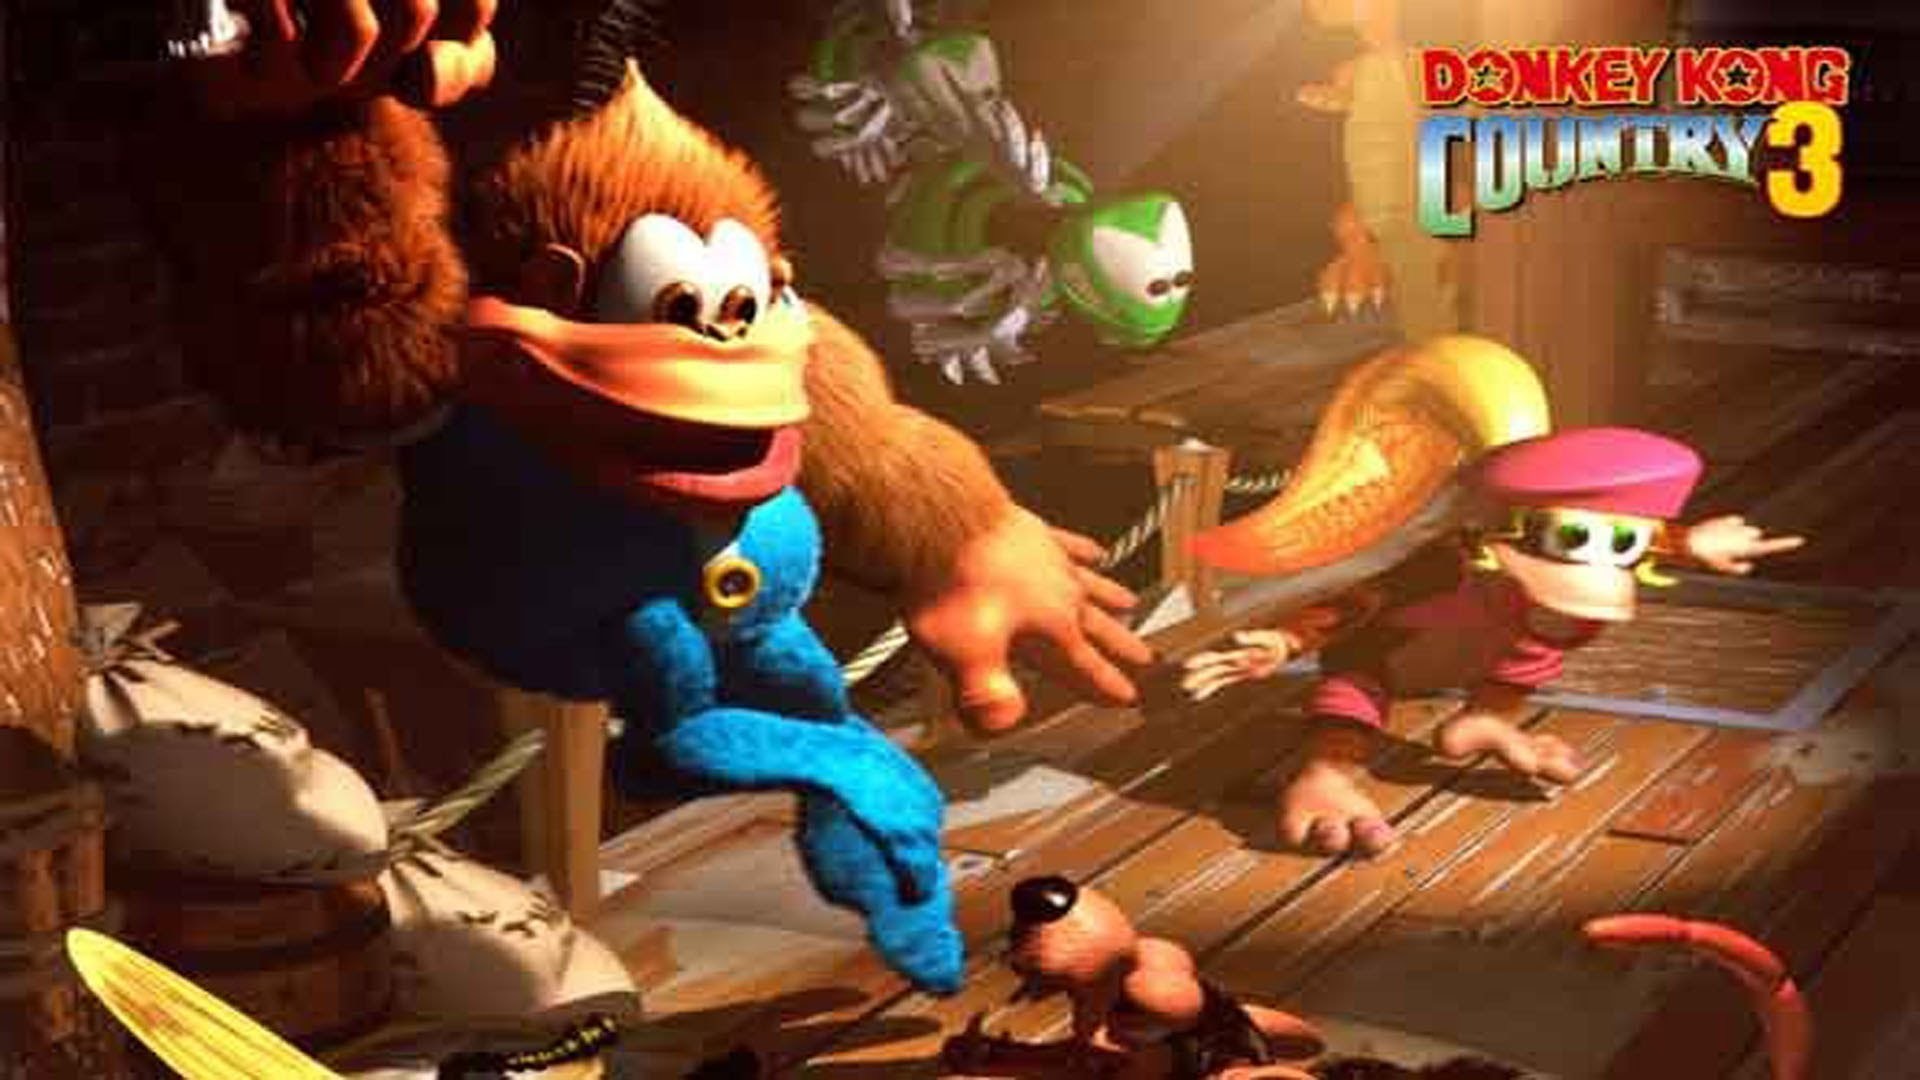 Donkey Kong Country Iphone wallpapers and ringtones 20  DKC Atlas Forum